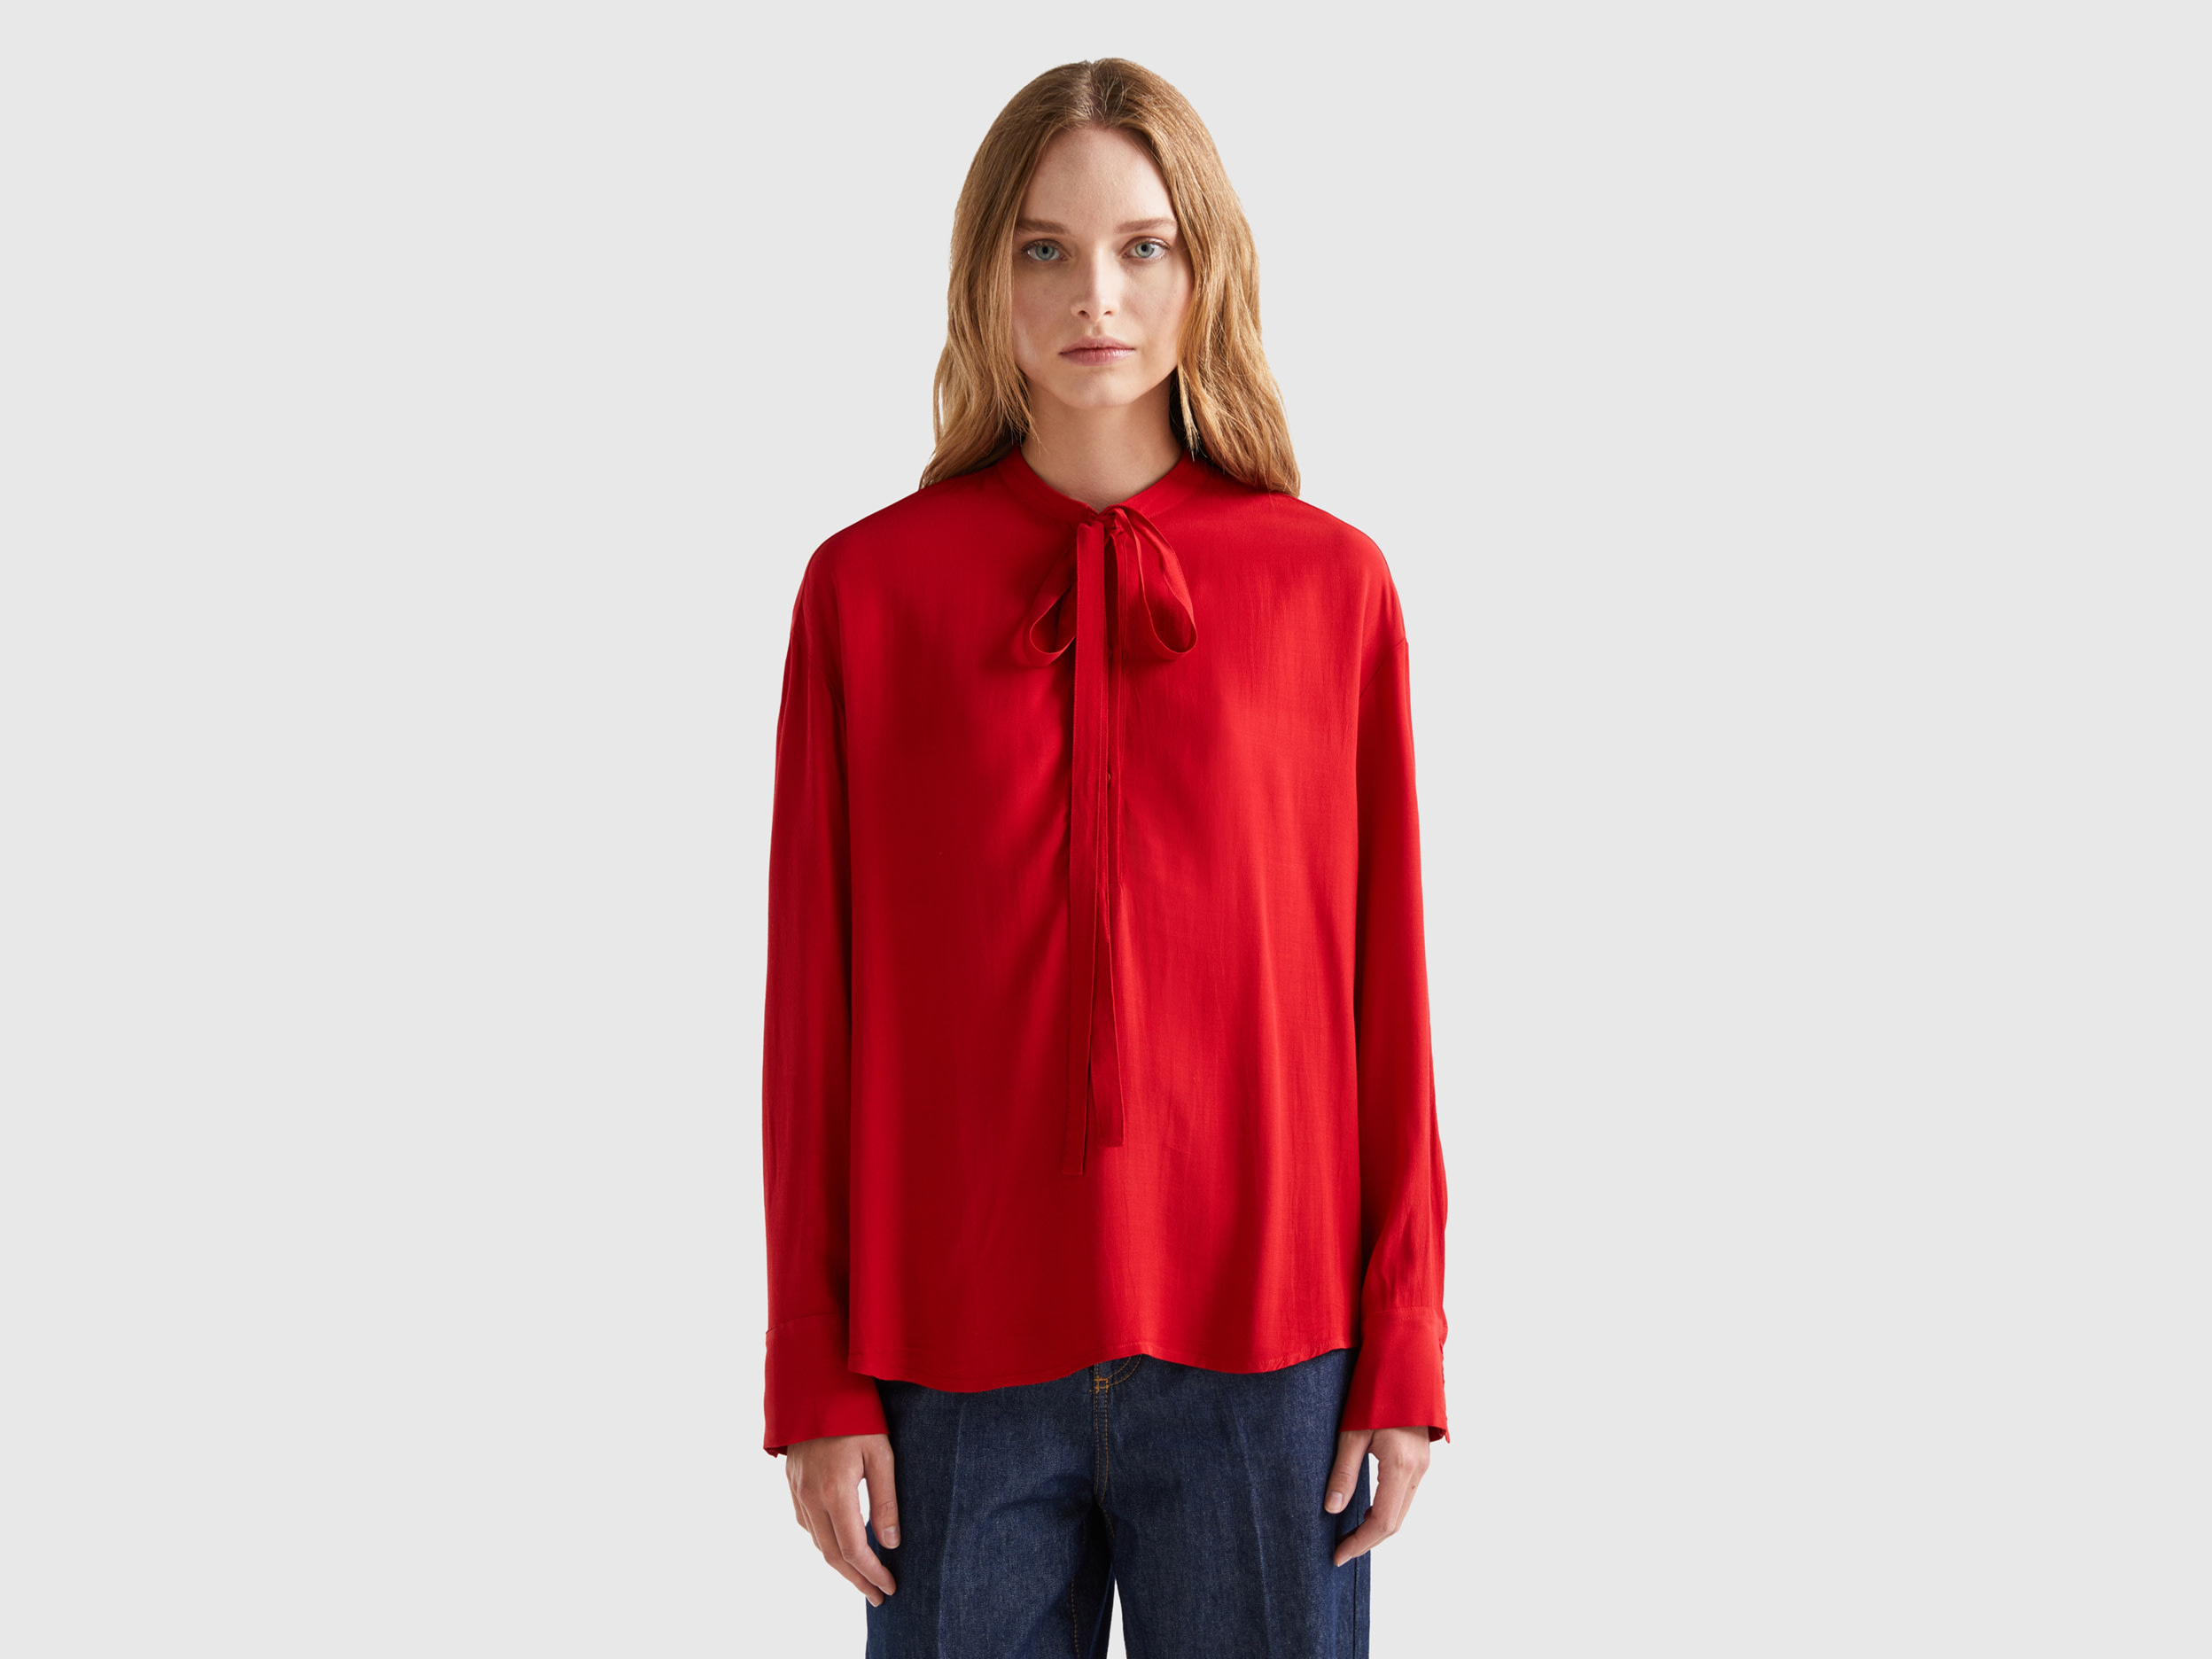 Benetton, Flowy Blouse With Laces, size M, Red, Women